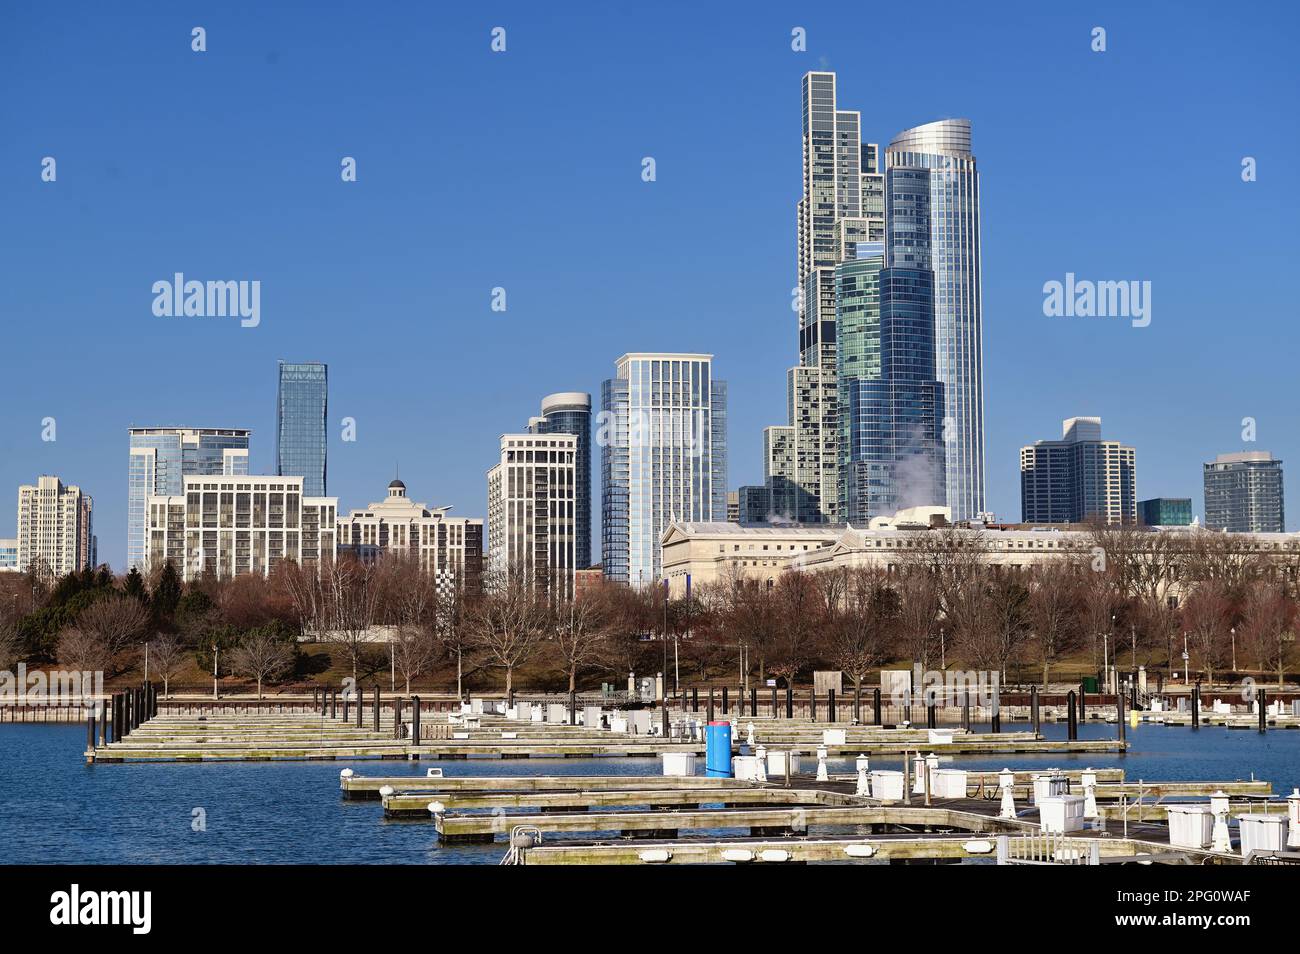 Chicago, Illinois, USA. Turned over boats in an empty harbor provide a foreground for buildings including NEMA Chicago and One Museum Park. Stock Photo